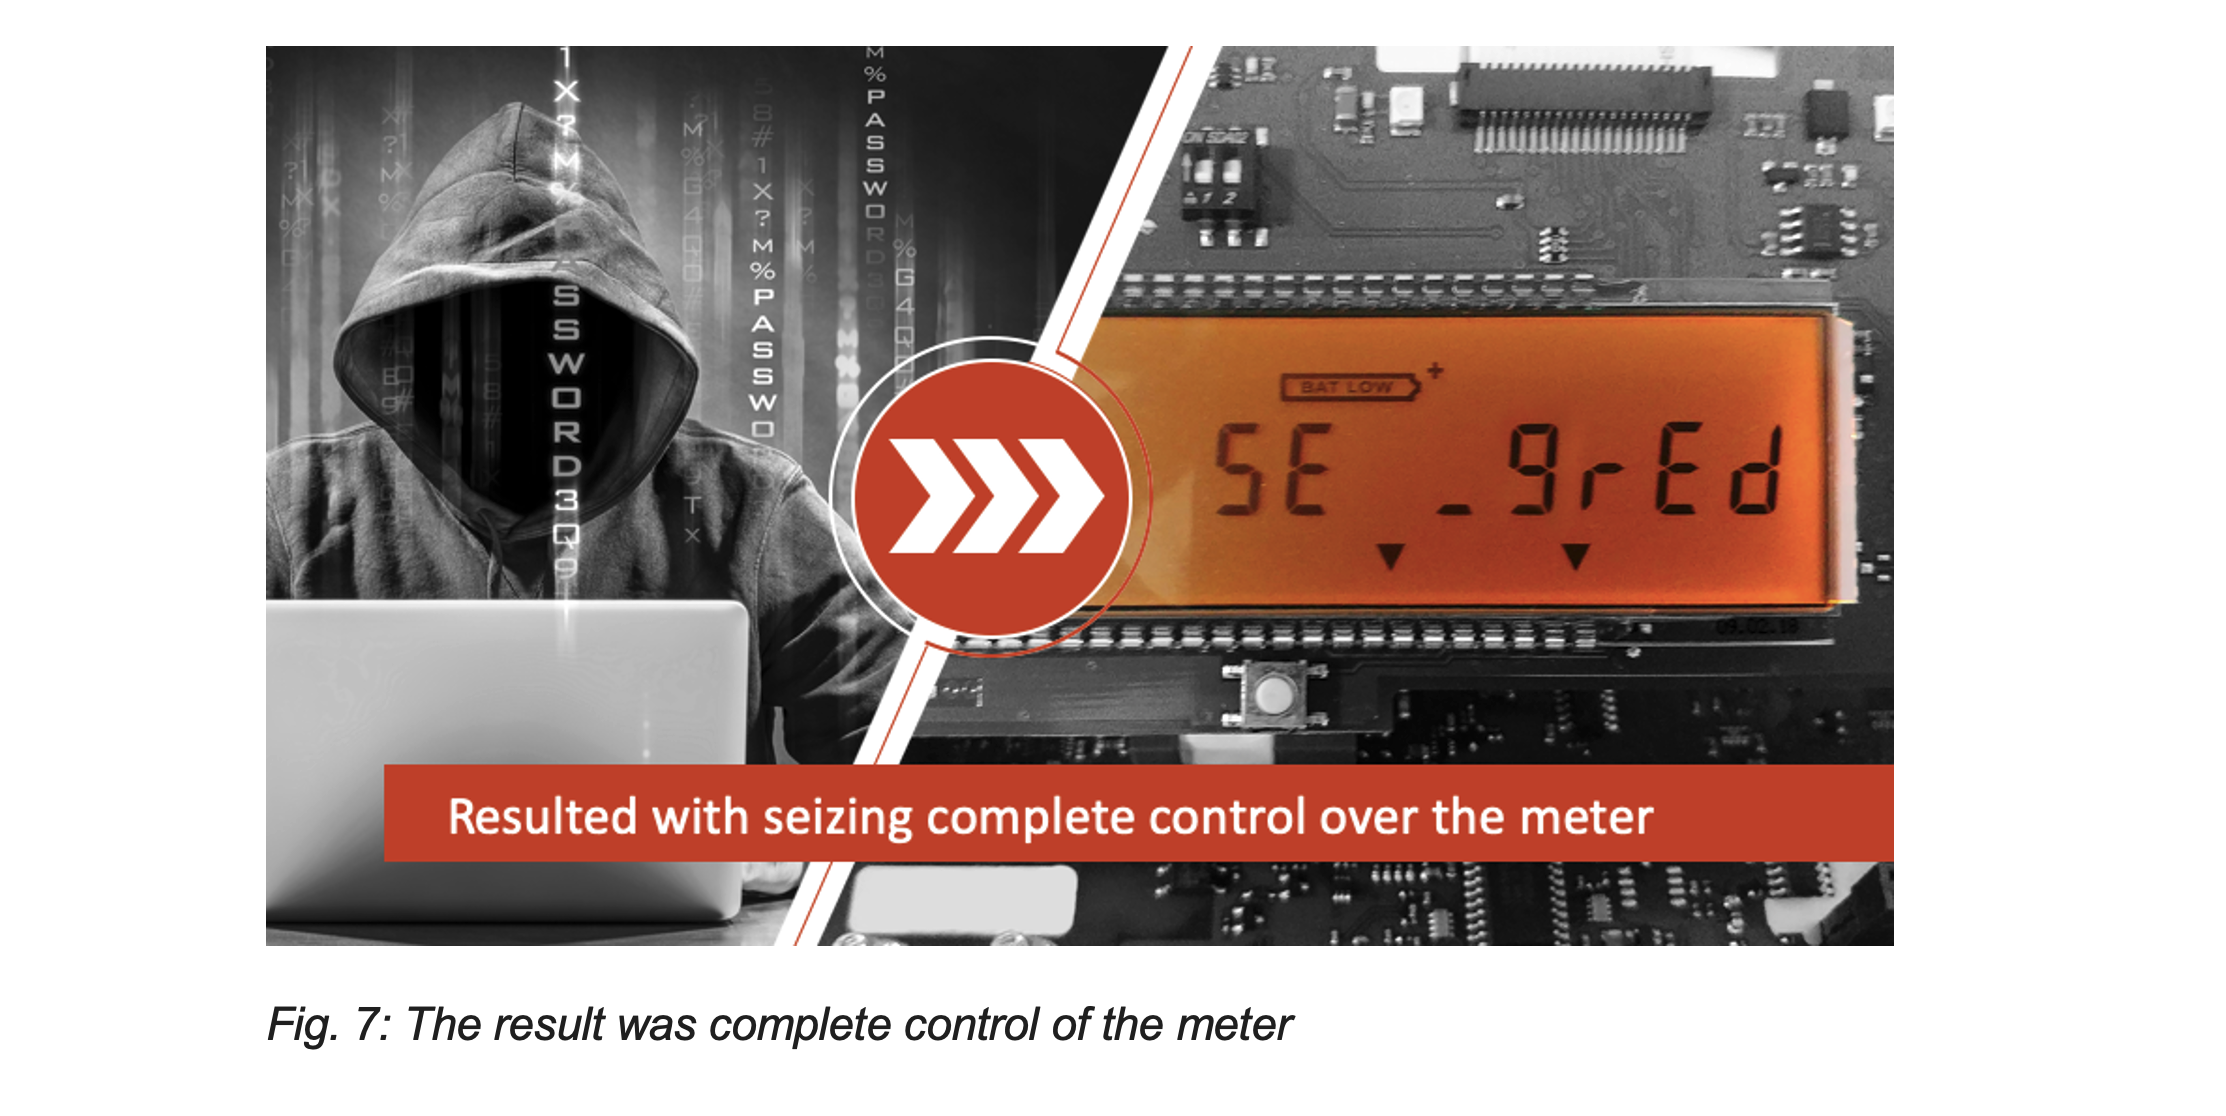 Fig. 7: The result was complete control of the meter